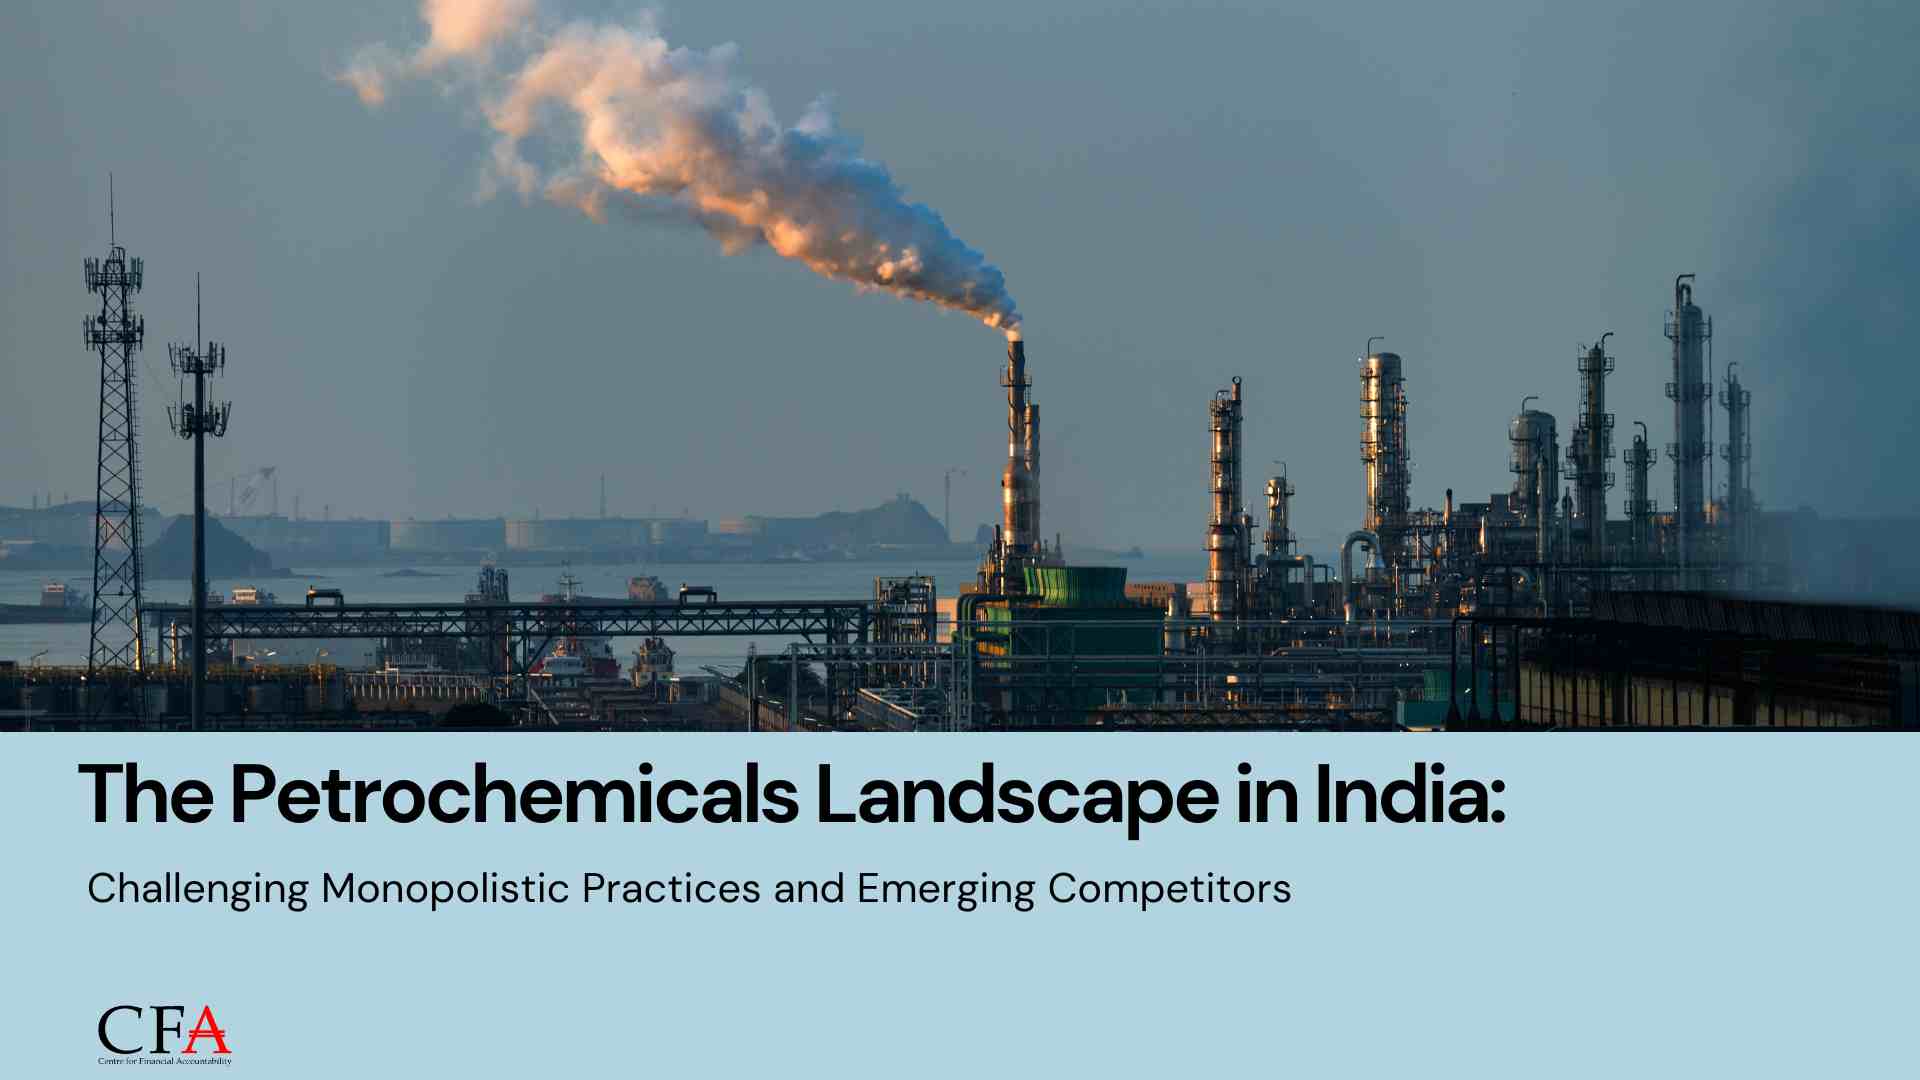 The Petrochemicals Landscape in India